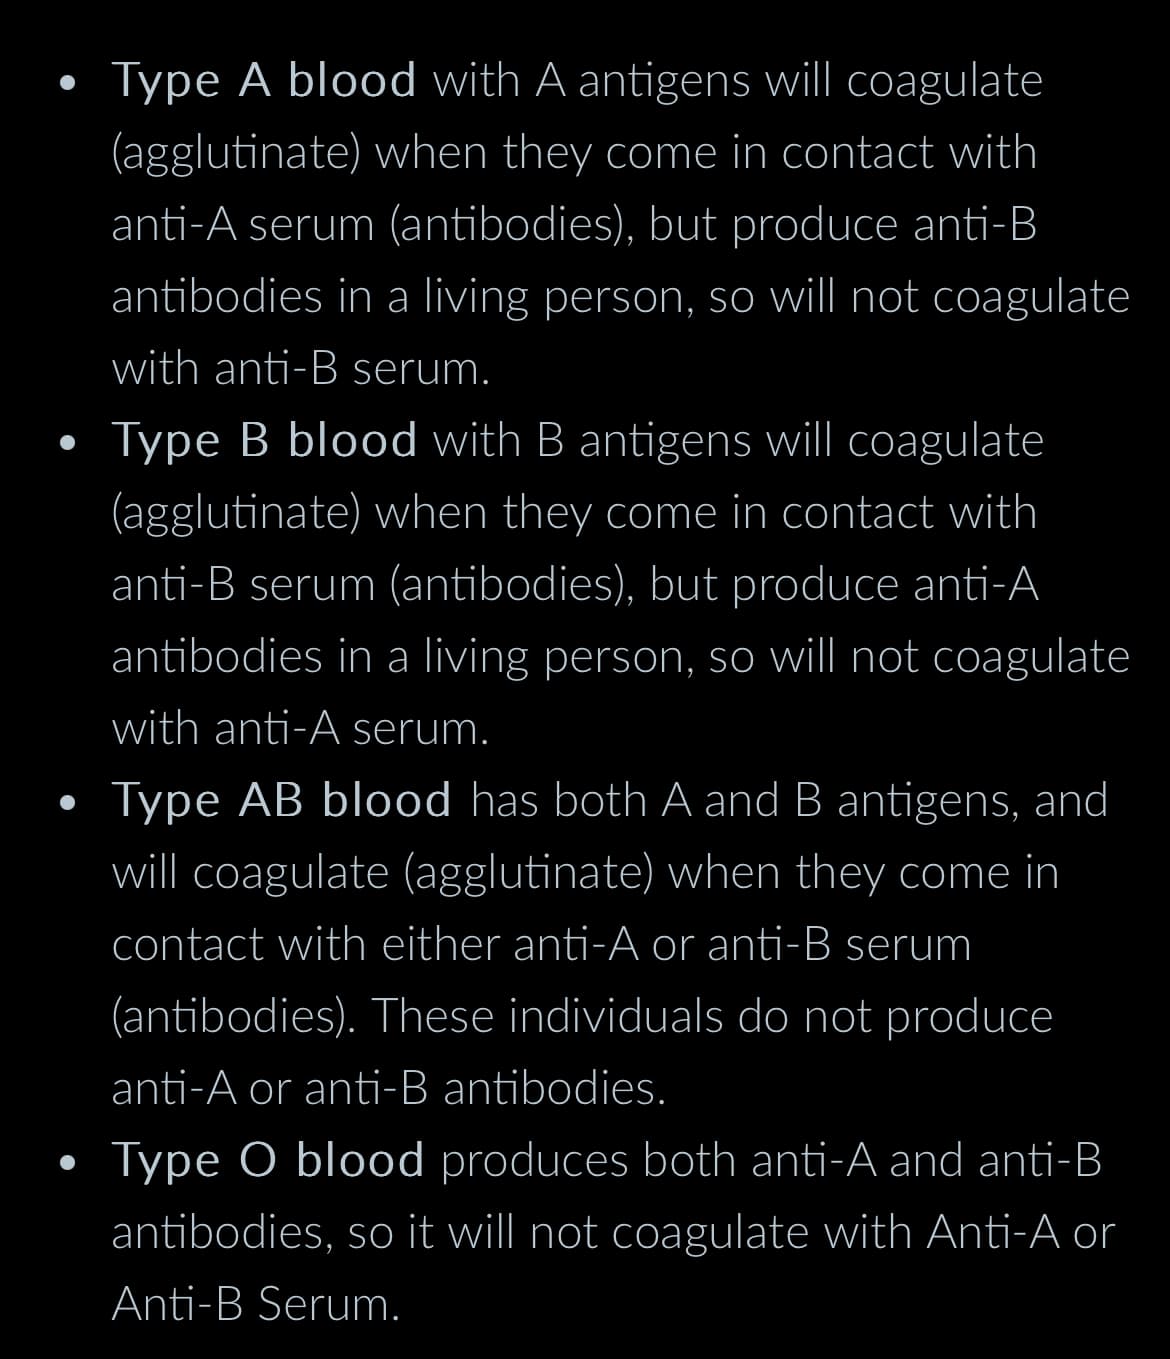 Type A blood with A antigens will coagulate
(agglutinate) when they come in contact with
anti-A serum (antibodies), but produce anti-B
antibodies in a living person, so will not coagulate
with anti-B serum.
Type B blood with B antigens will coagulate
(agglutinate) when they come in contact with
anti-B serum (antibodies), but produce anti-A
antibodies in a living person, so will not coagulate
with anti-A serum.
Type AB blood has both A and B antigens, and
will coagulate (agglutinate) when they come in
contact with either anti-A or anti-B serum
(antibodies). These individuals do not produce
anti-A or anti-B antibodies.
Type O blood produces both anti-A and anti-B
antibodies, so it will not coagulate with Anti-A or
Anti-B Serum.